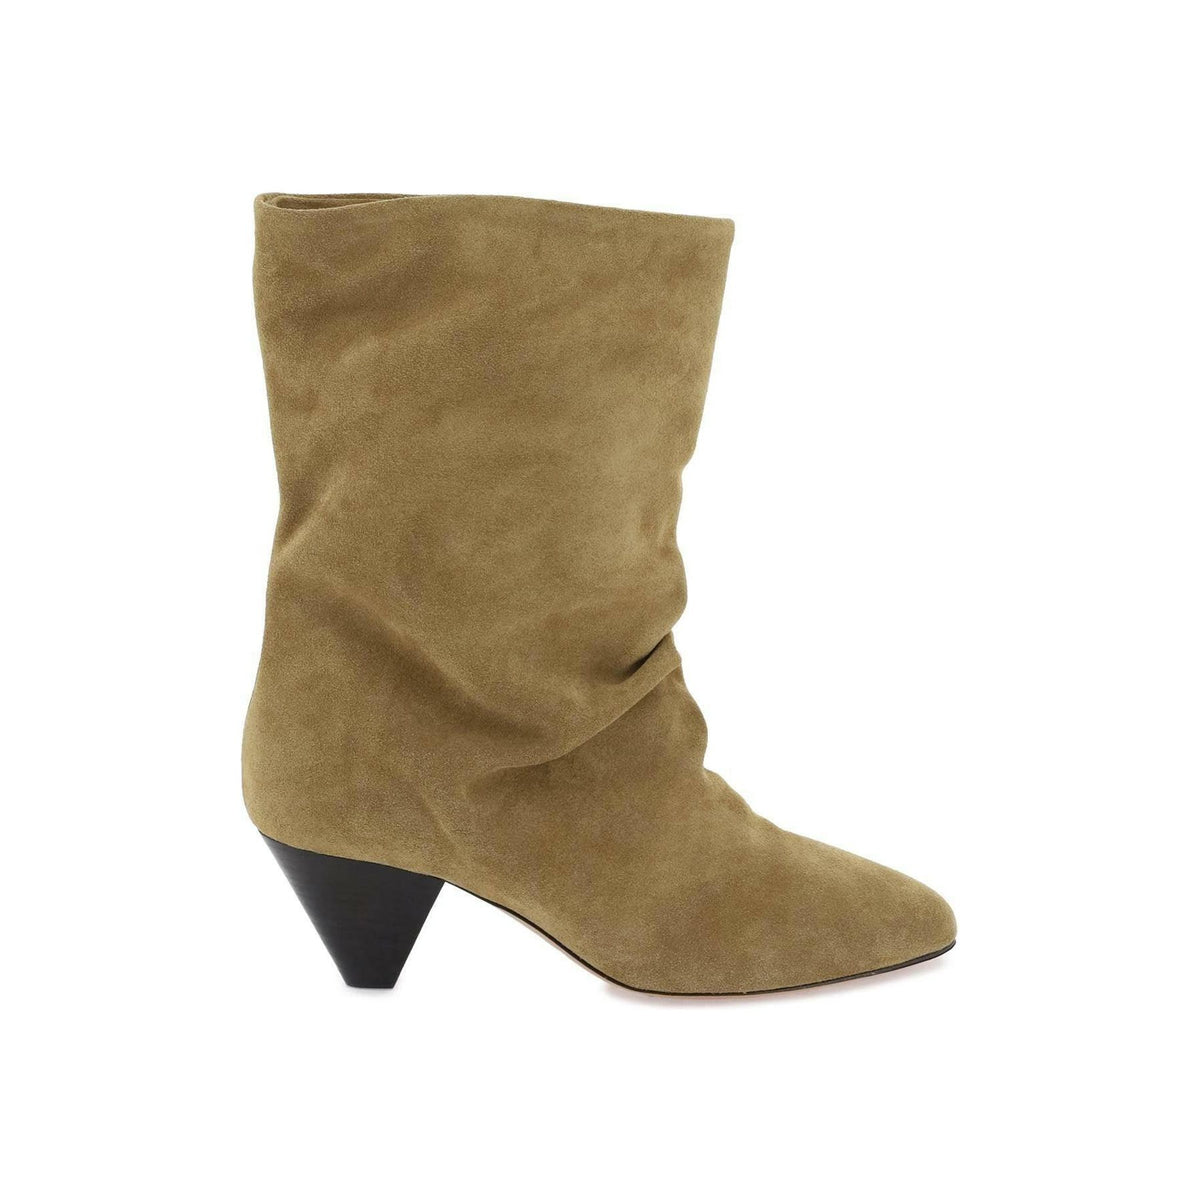 ISABEL MARANT - Taupe Suede Reachi Ankle Boots - JOHN JULIA